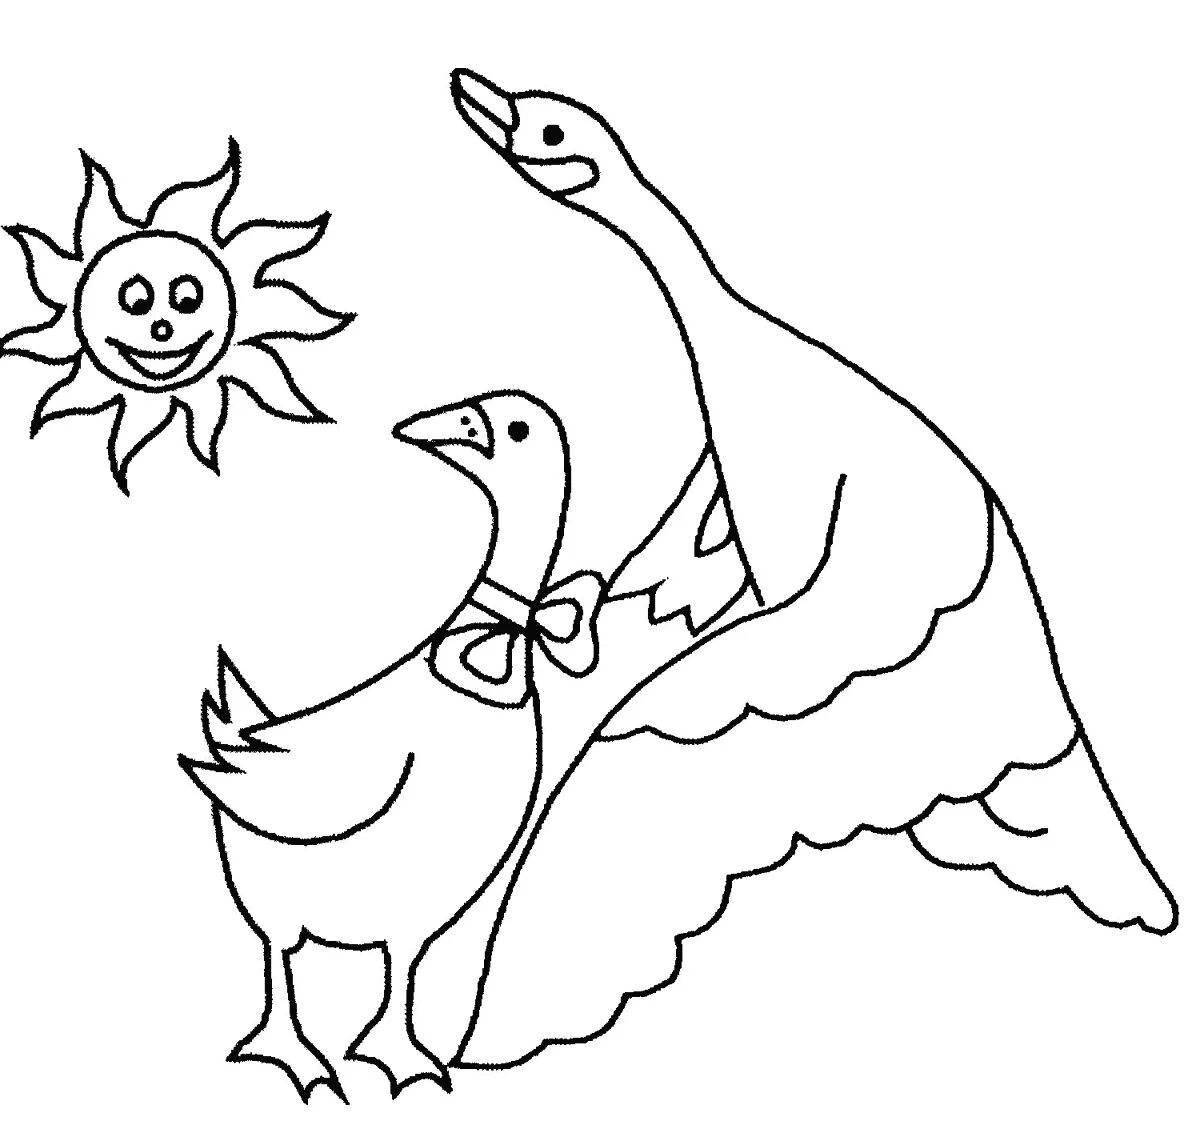 Magic Goose Coloring Page for 6-7 year olds